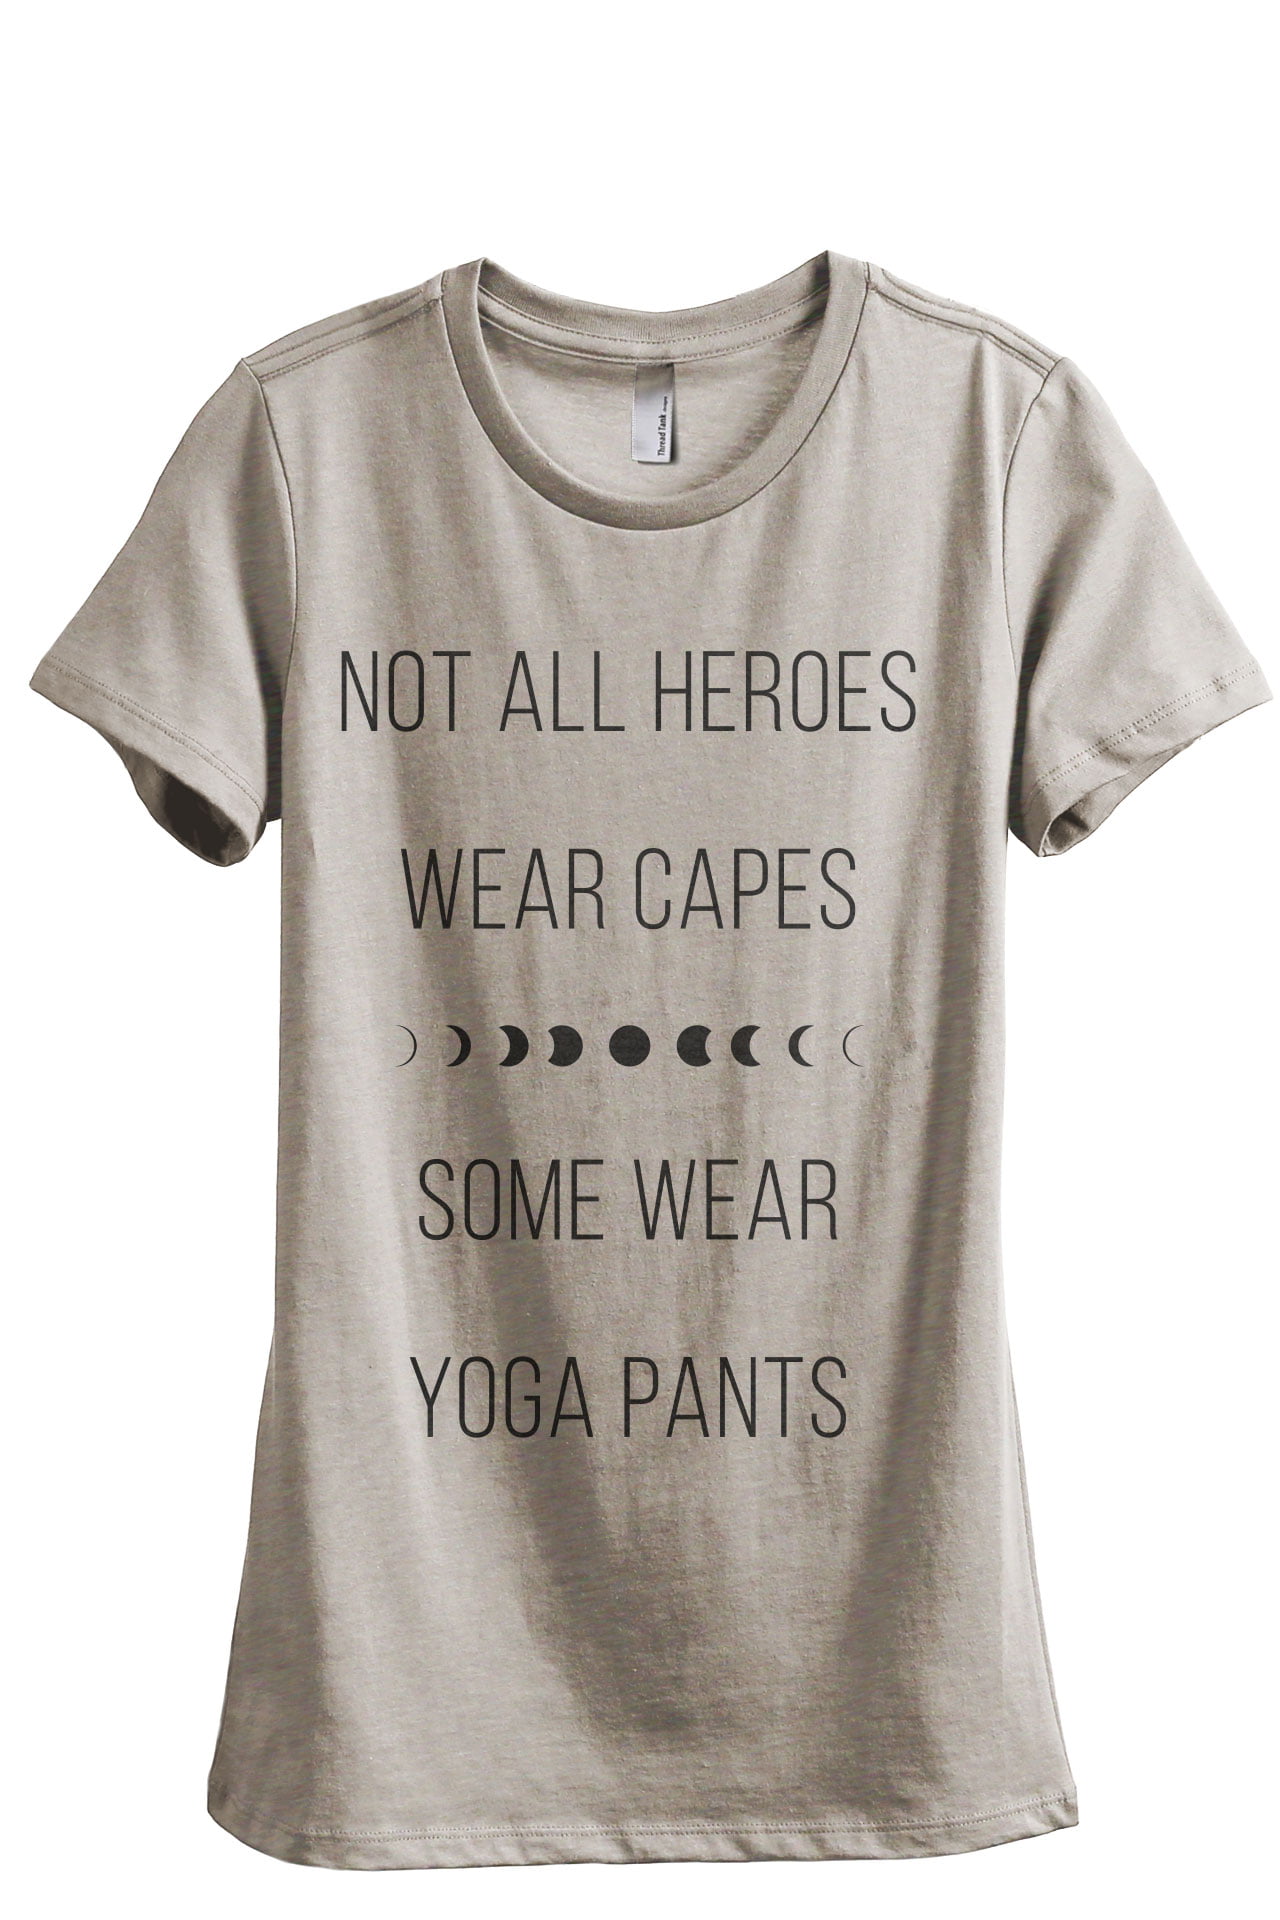 Not All Heroes Wear Capes Some Wear Yoga Pants Women's Fashion Relaxed  T-Shirt Tee Heather Tan Small